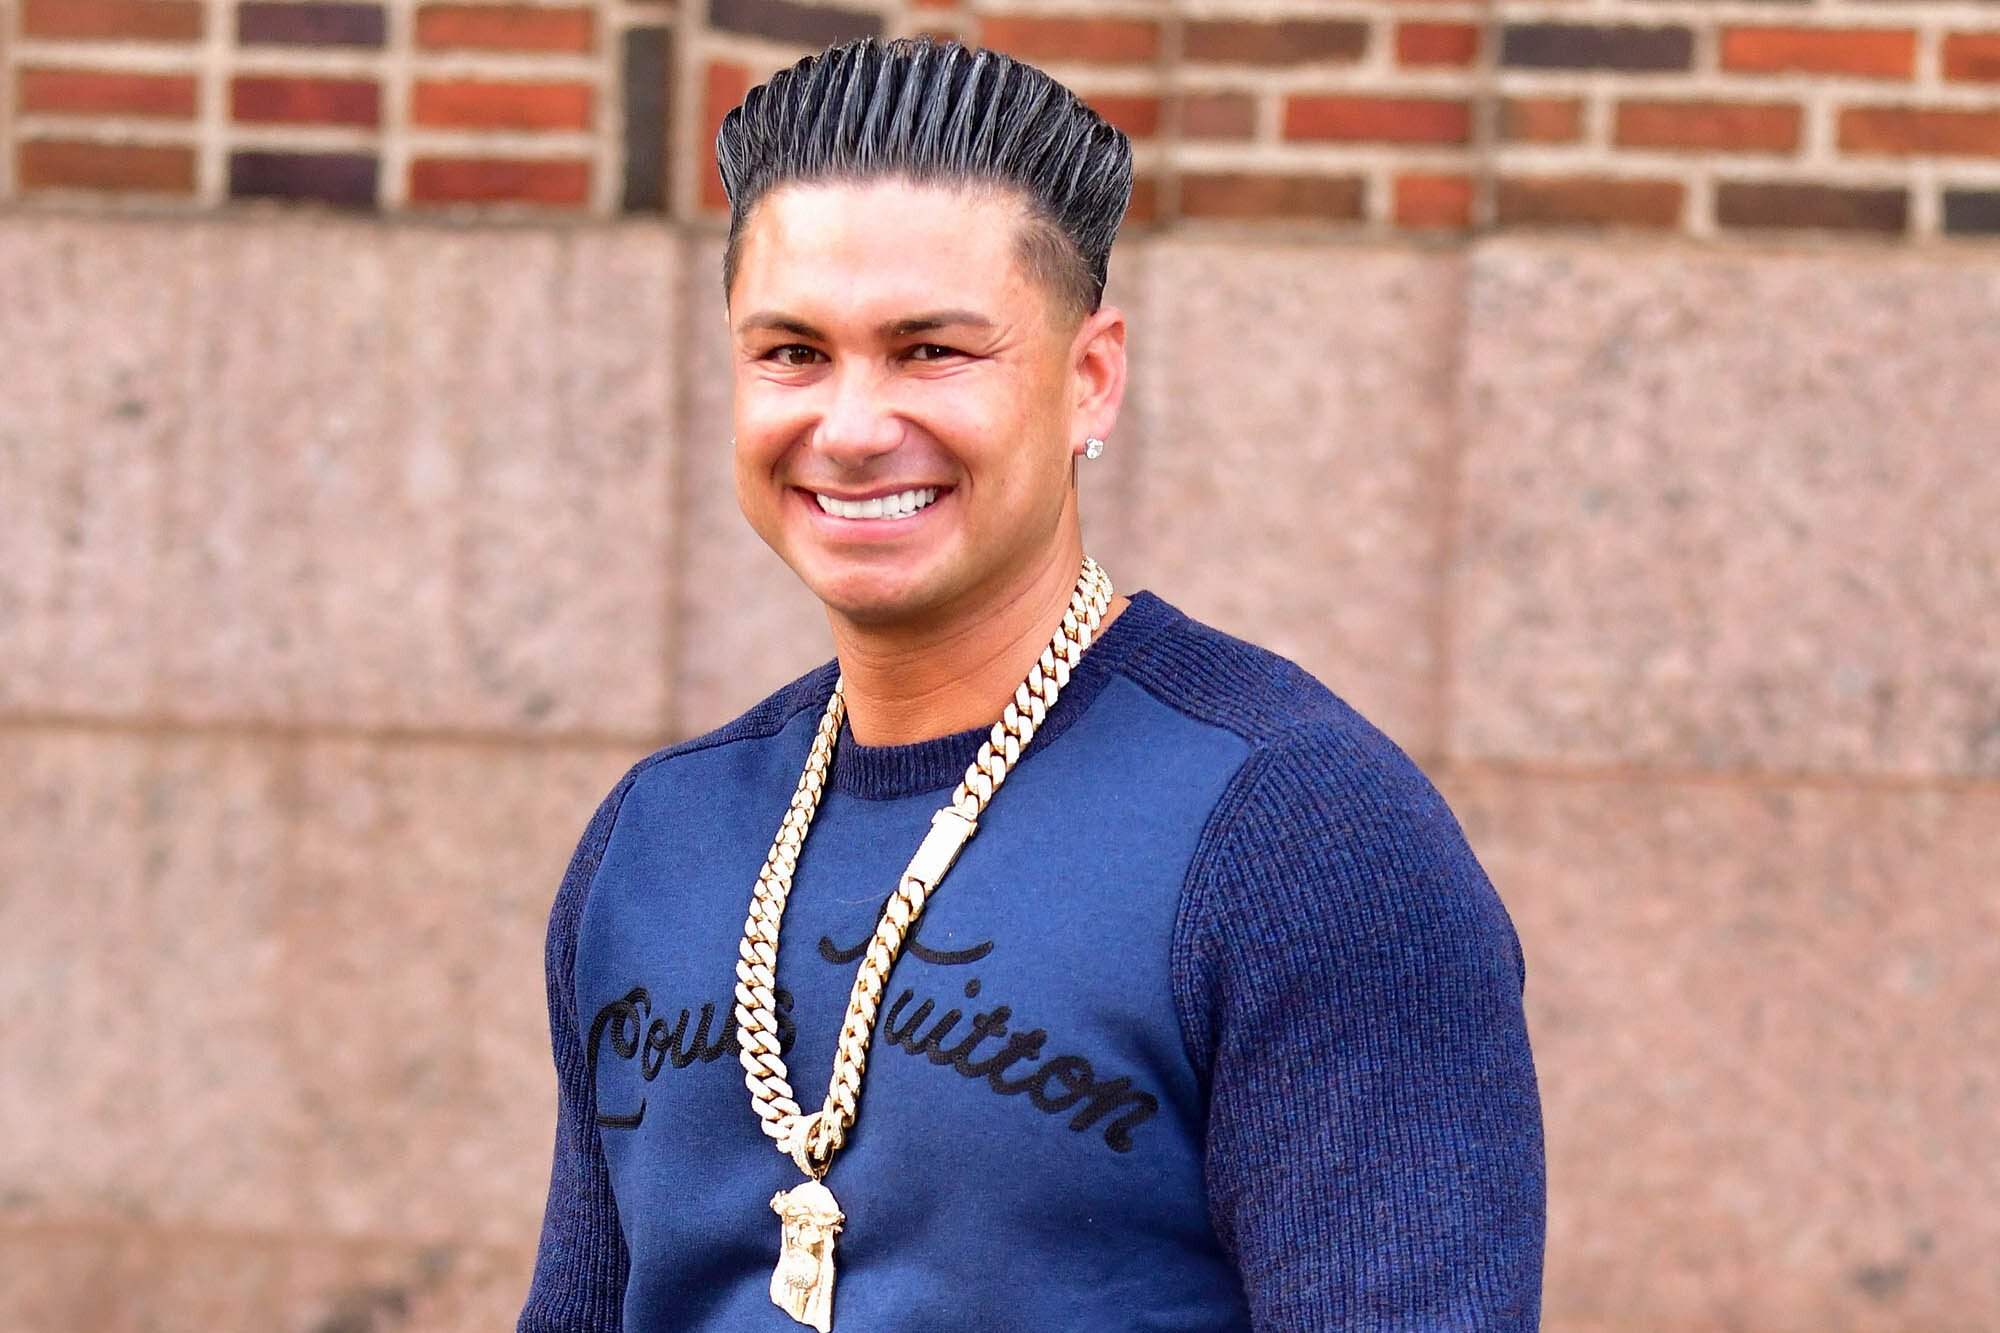 49 Facts about Pauly D